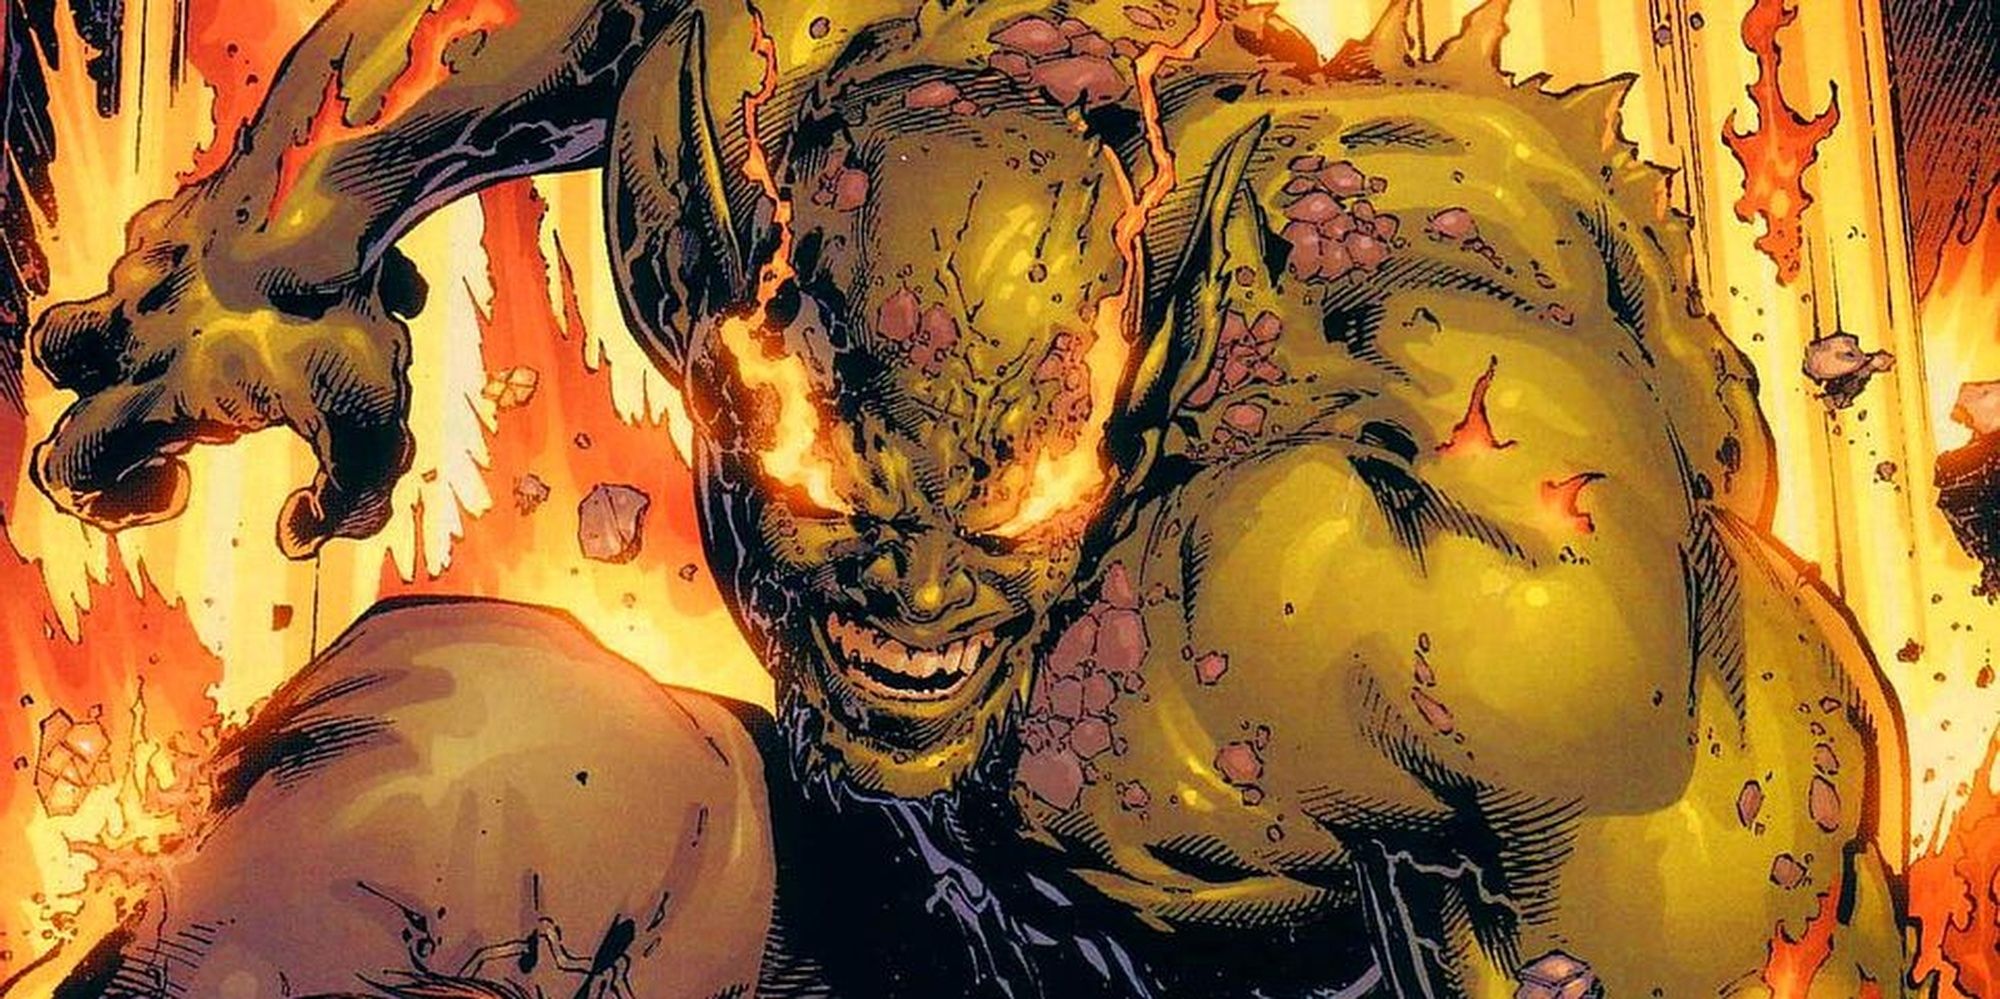 Ultimate Green Goblin on fire Cropped